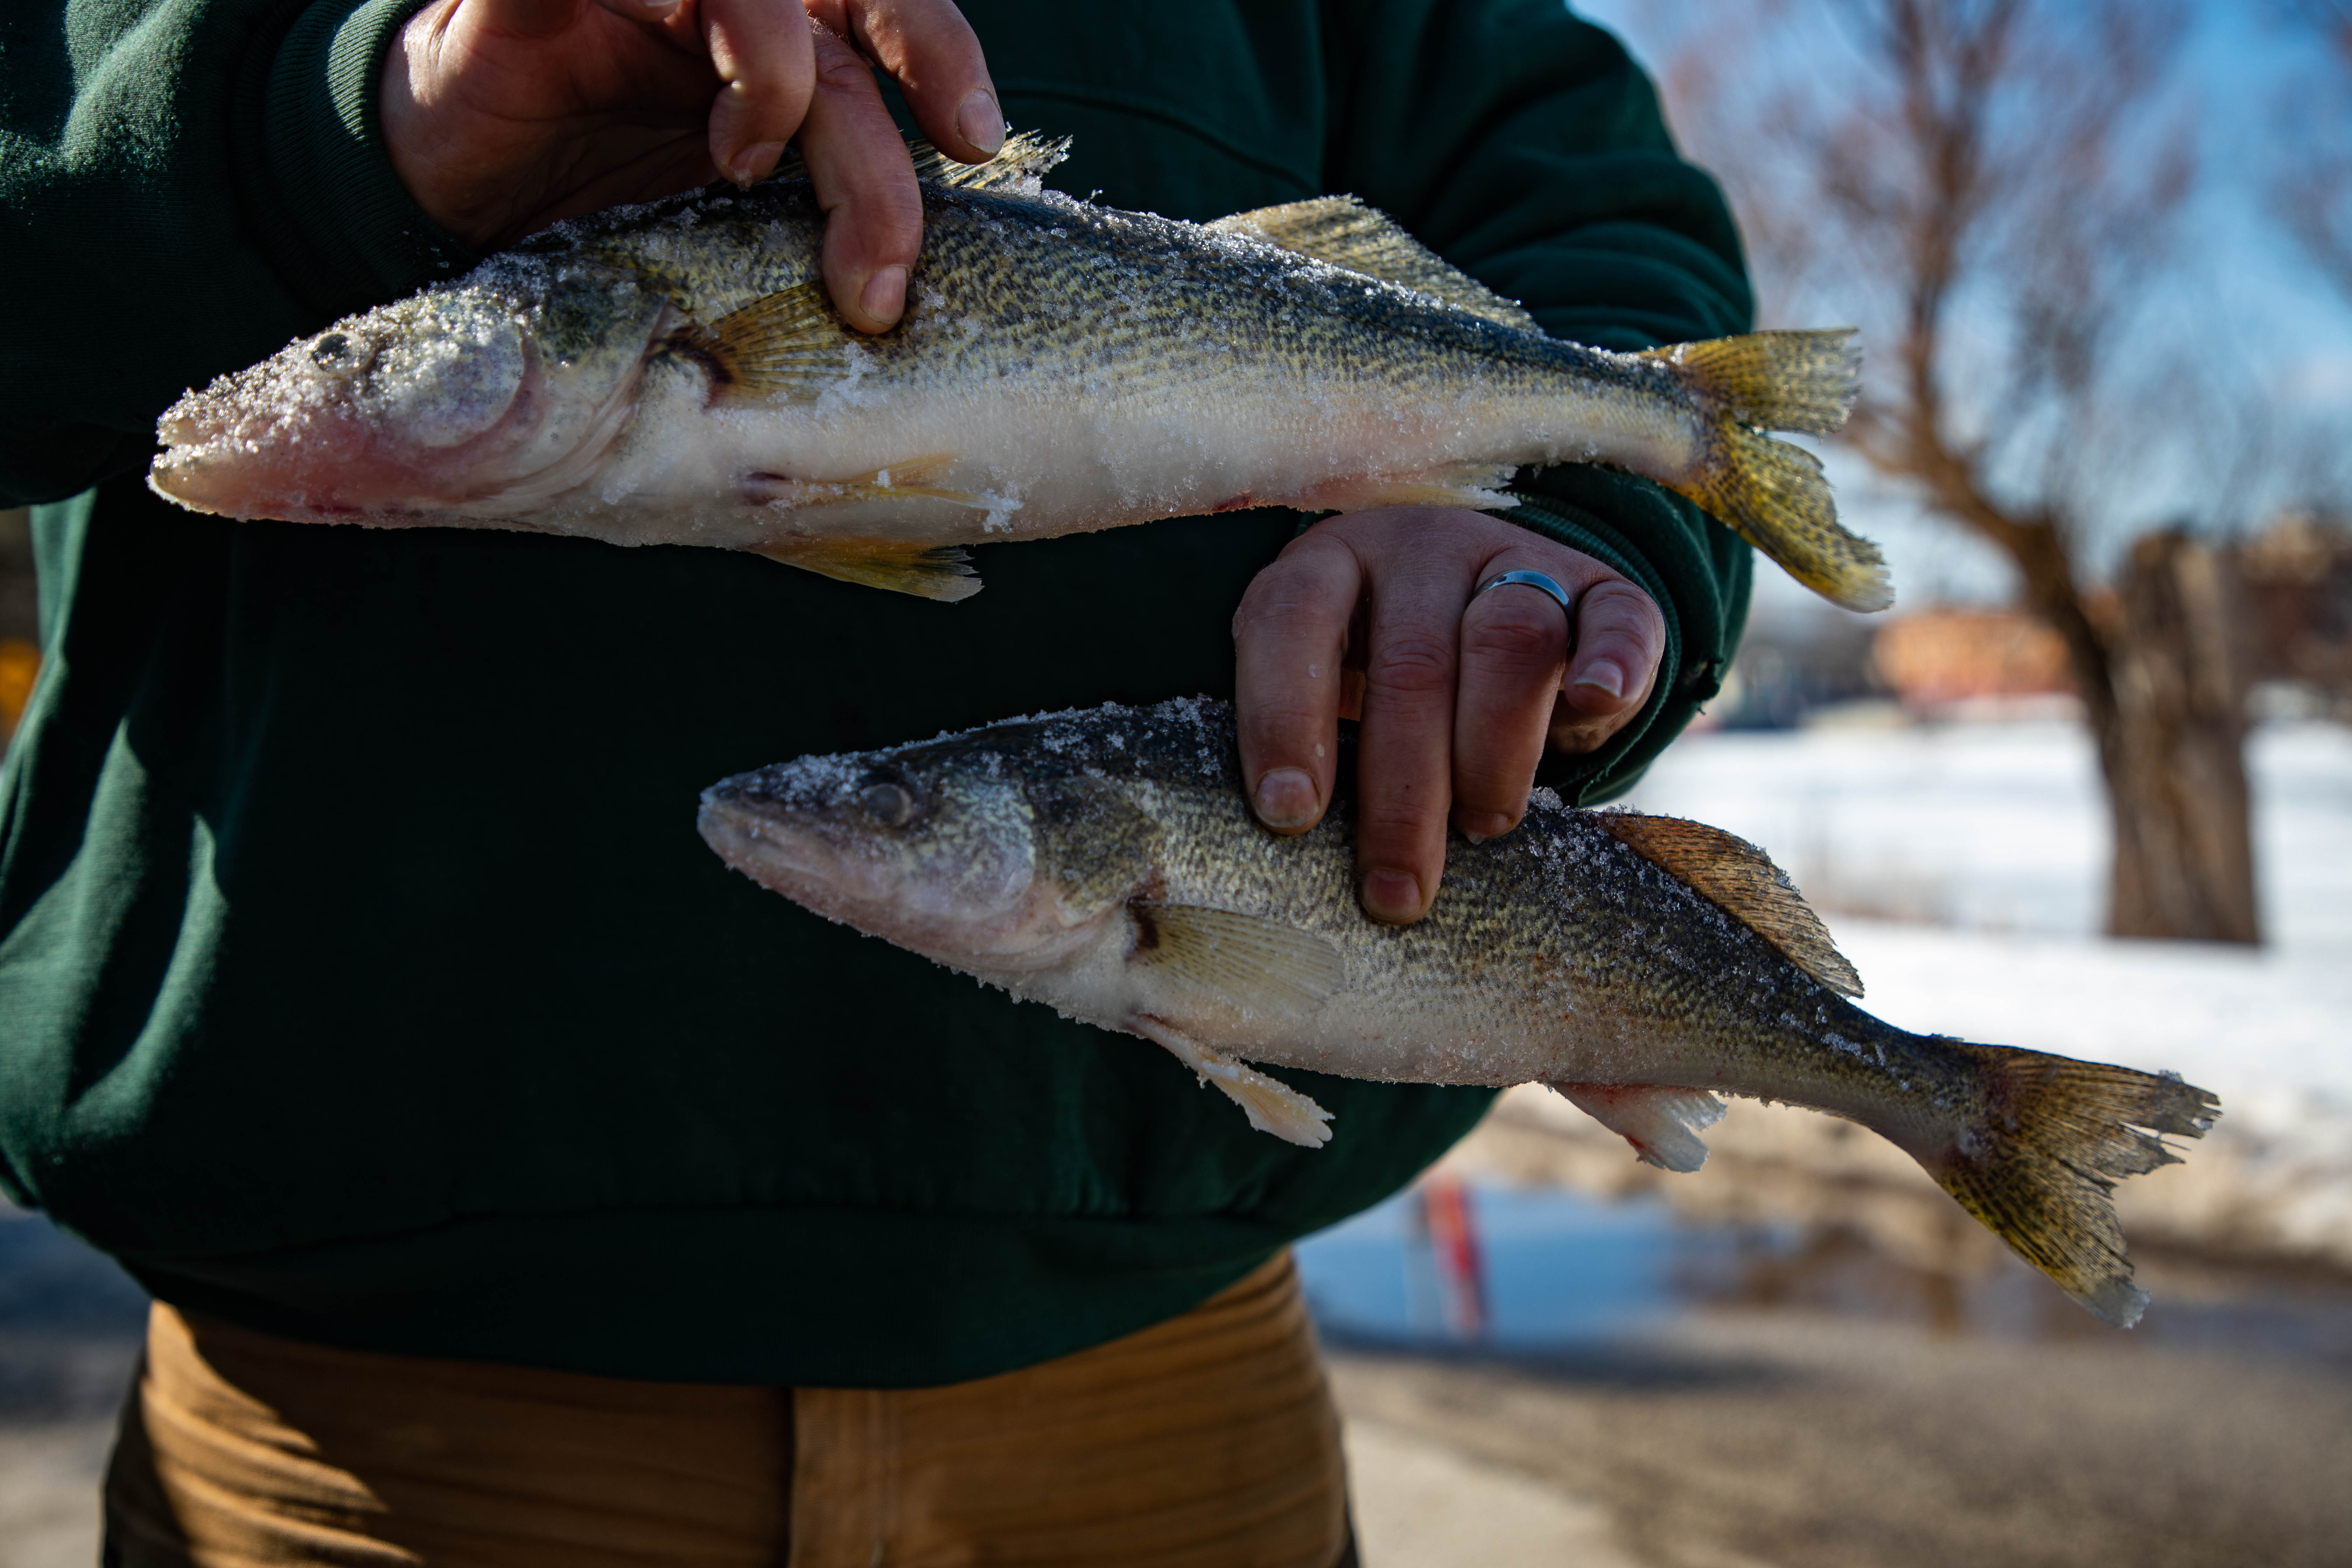 Angler alert: 23M walleye eggs being collected on Muskegon River